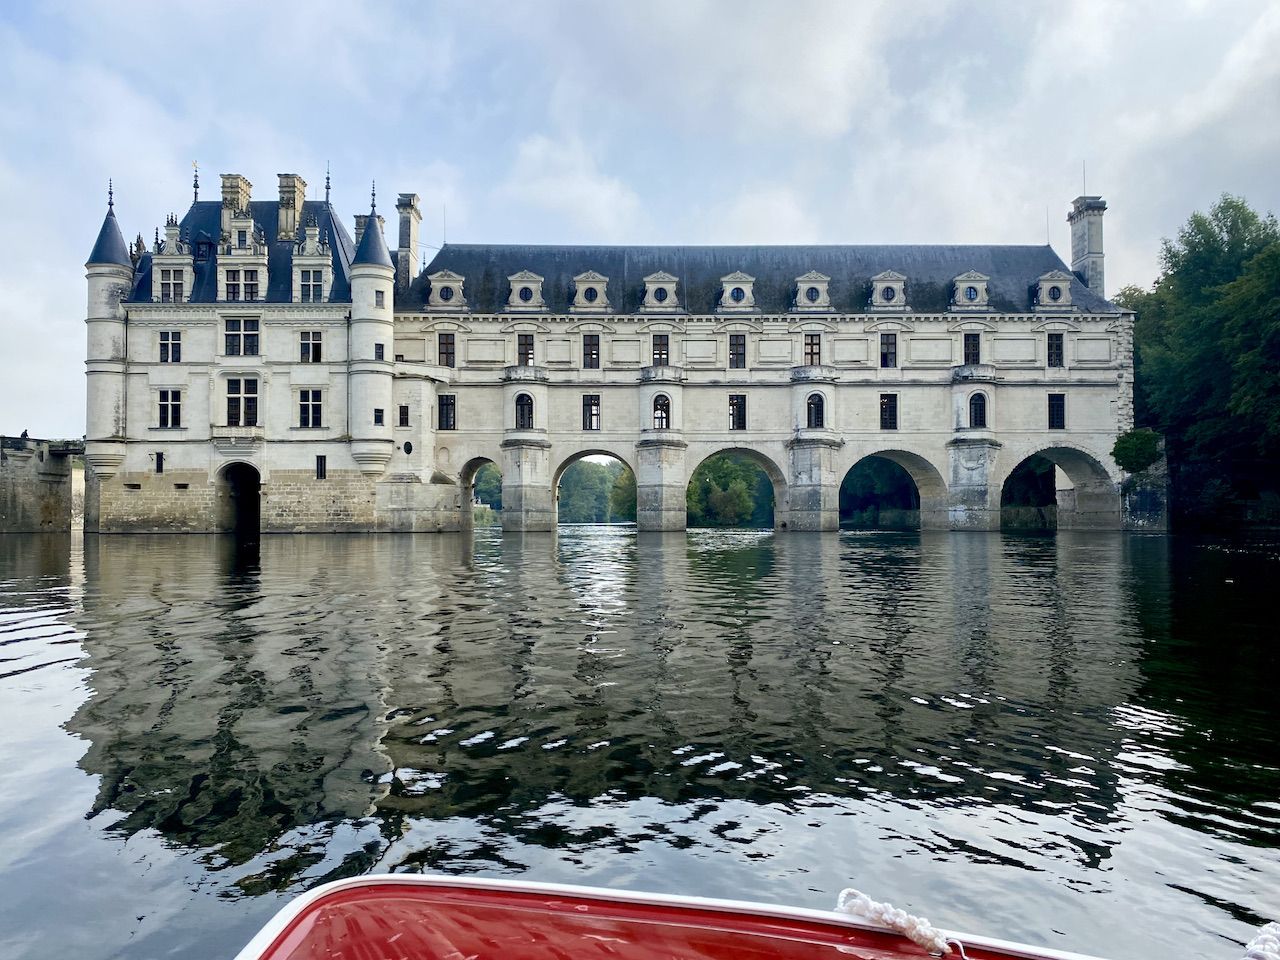 Looking back at Chateau Chenonceau from a boat